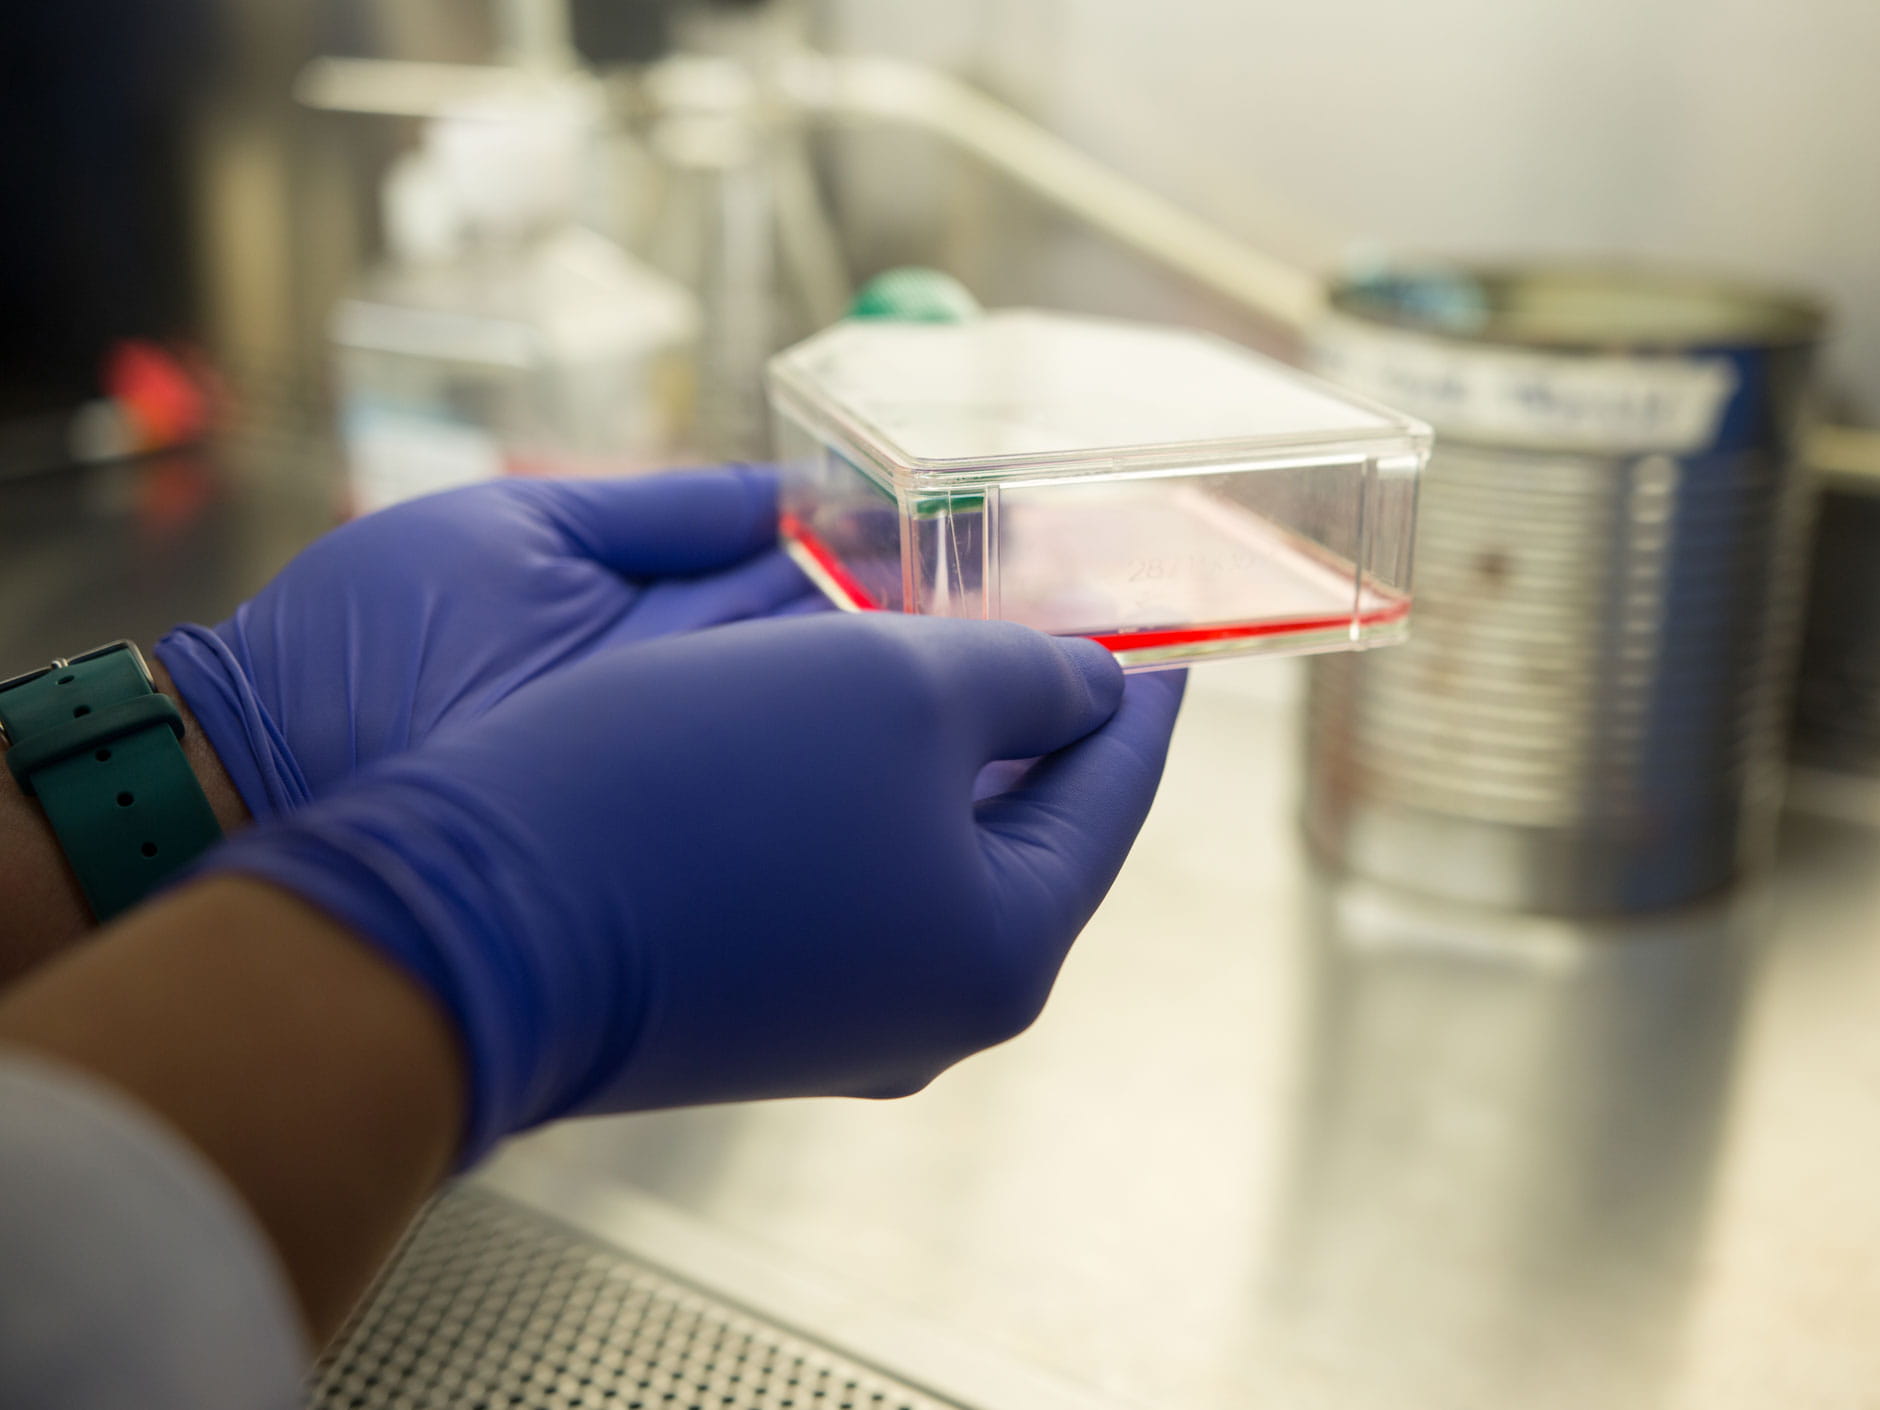 image of gloved hands holding a sample in a life science lab